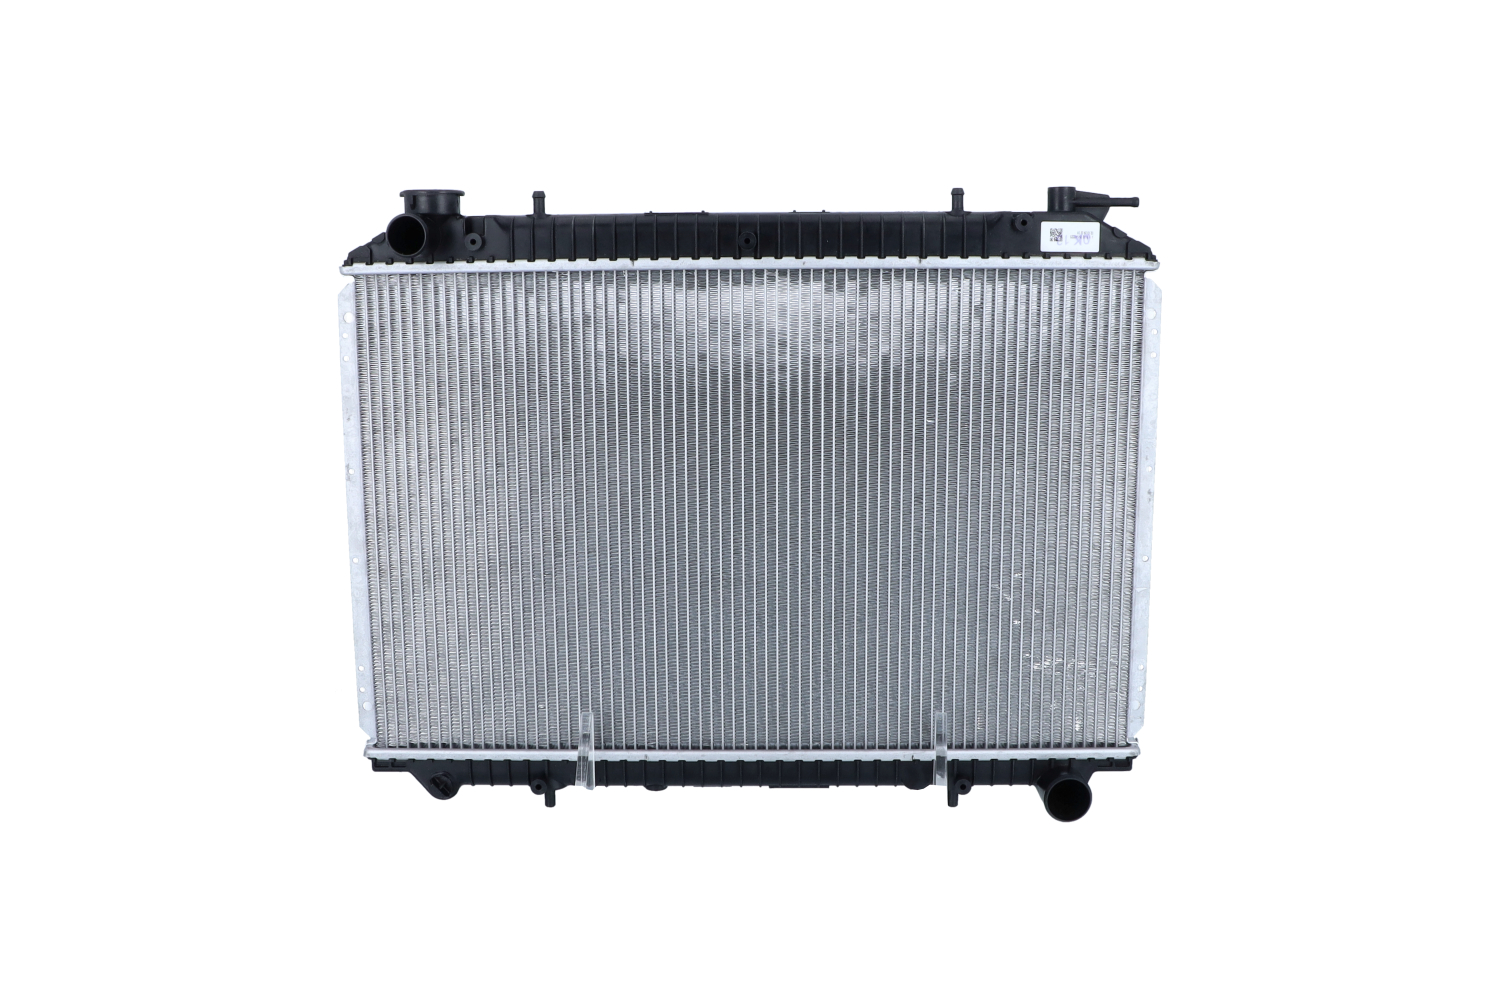 NRF 509534 Engine radiator Aluminium, 703 x 422 x 30 mm, with mounting parts, Brazed cooling fins